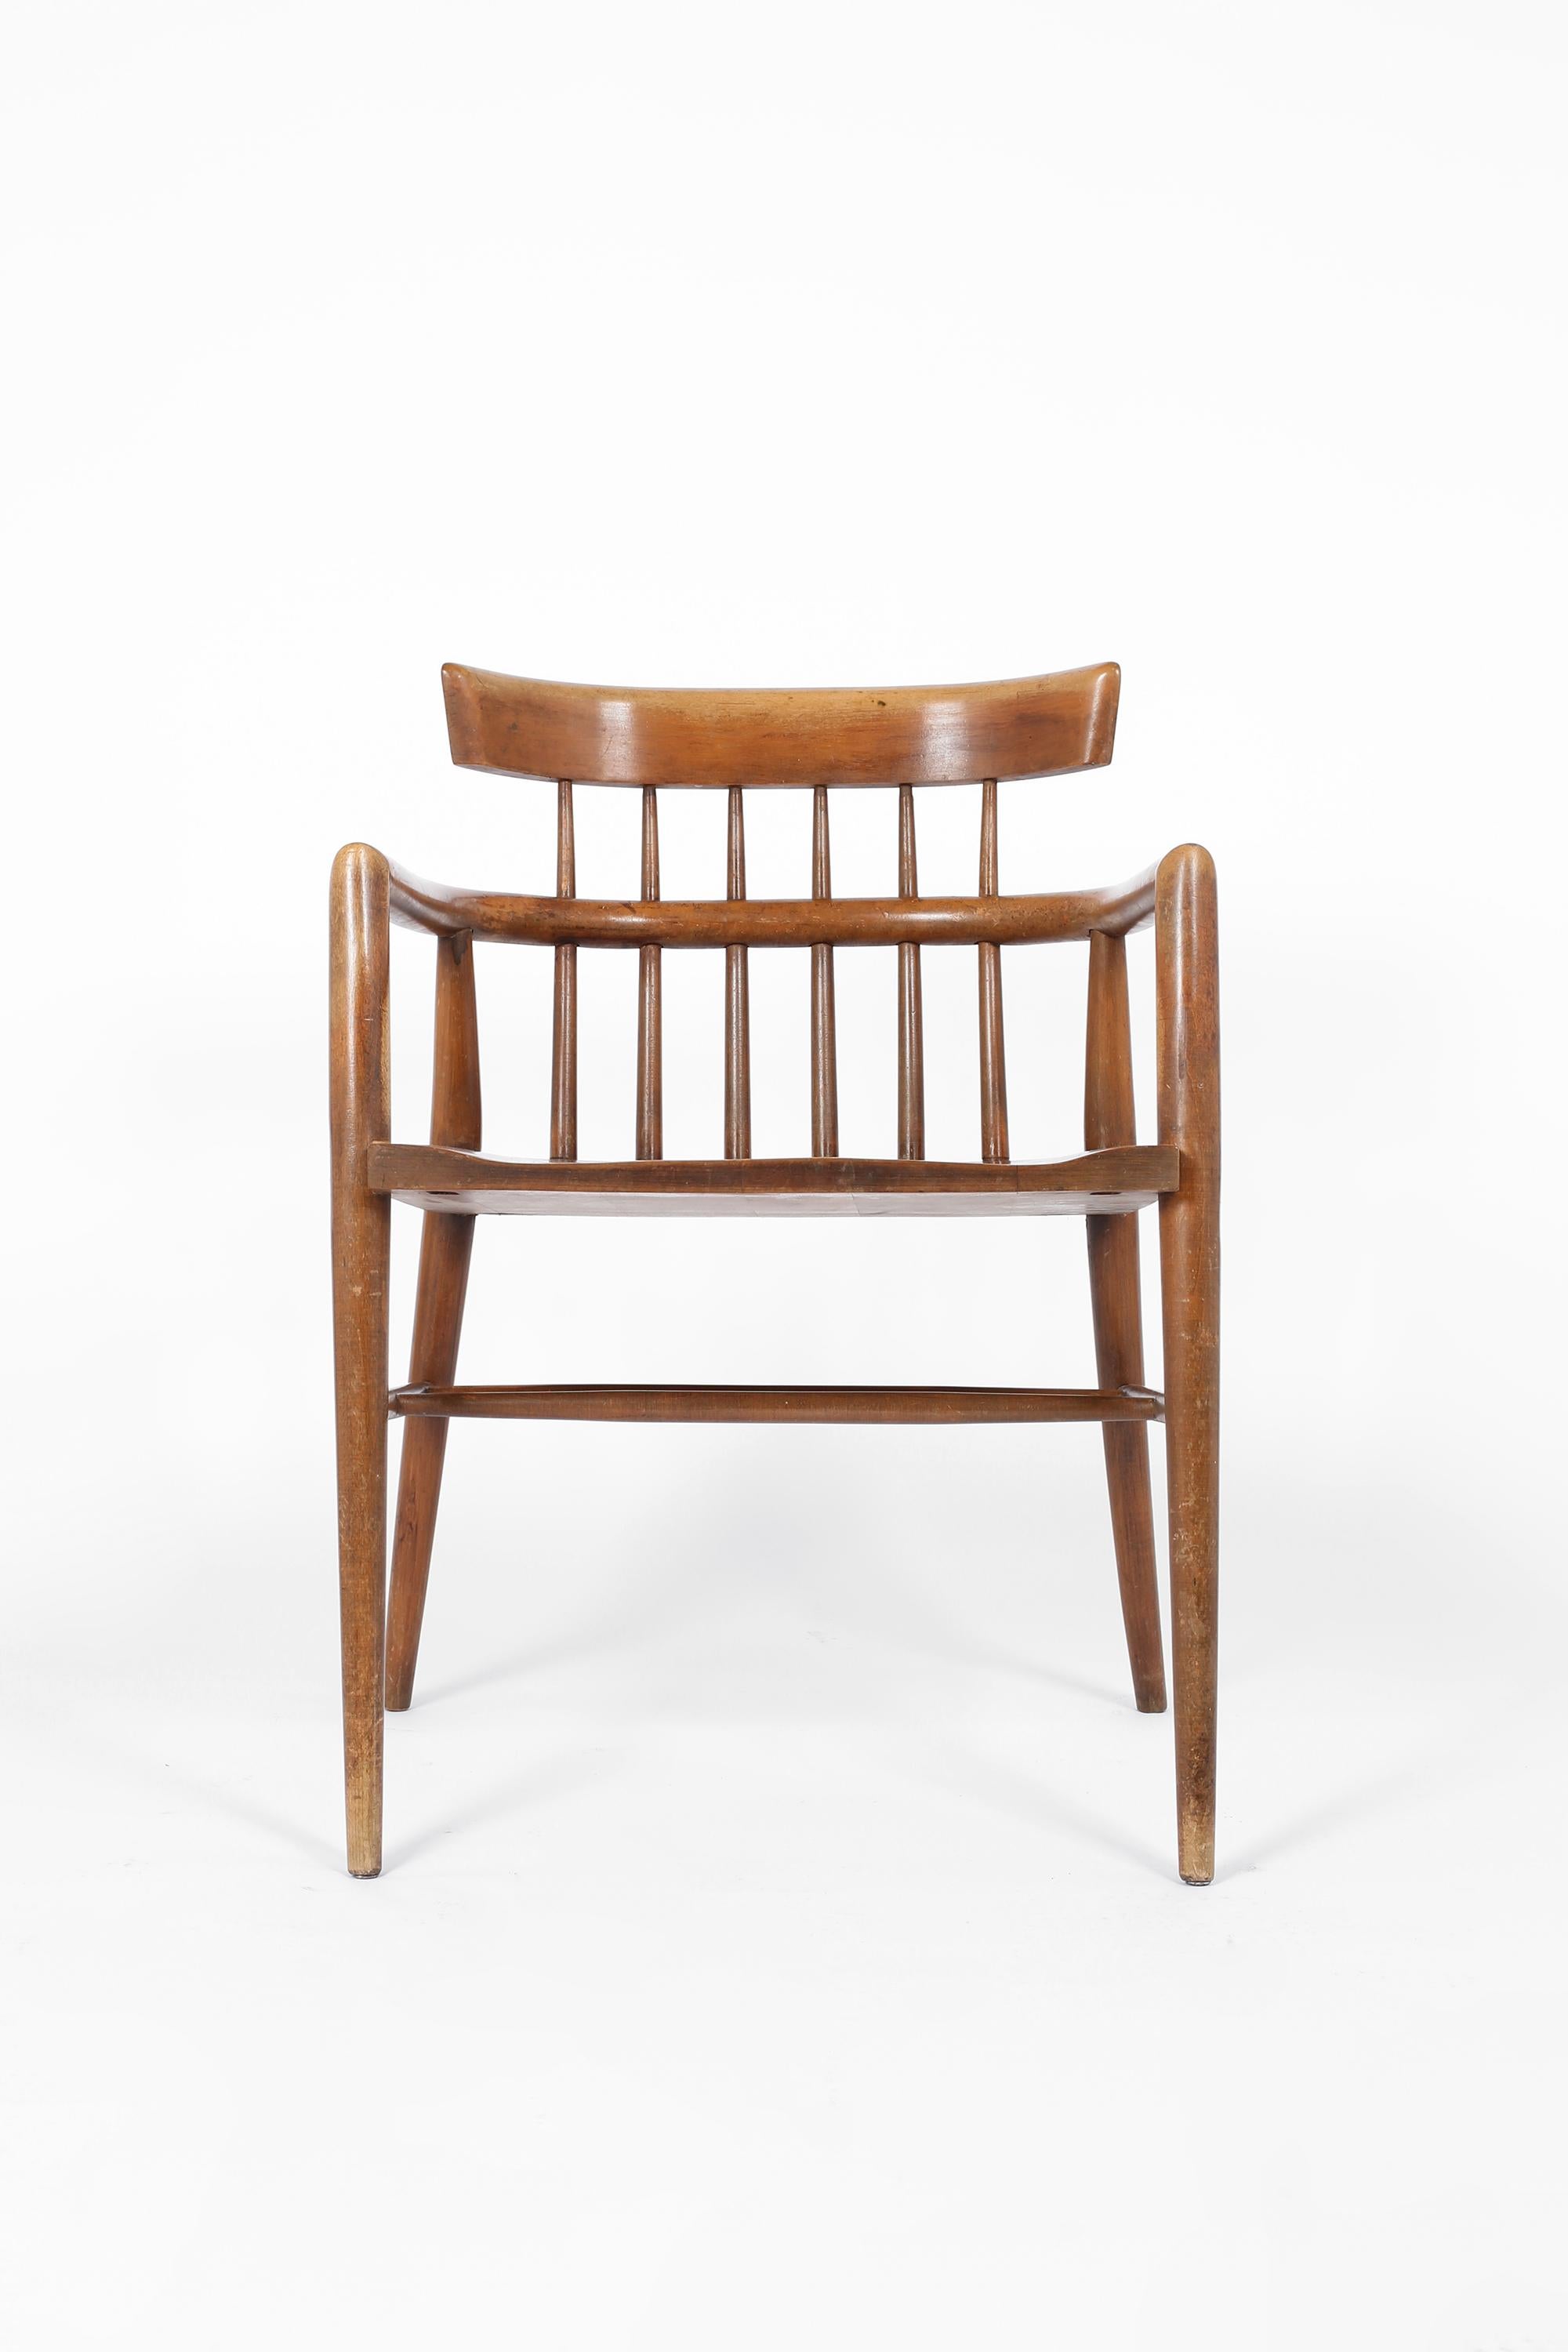 A rare model 1532 ‘Captain’s Chair’ in solid maple by Paul McCobb for Winchendon Furniture Co. USA, c. 1950s.